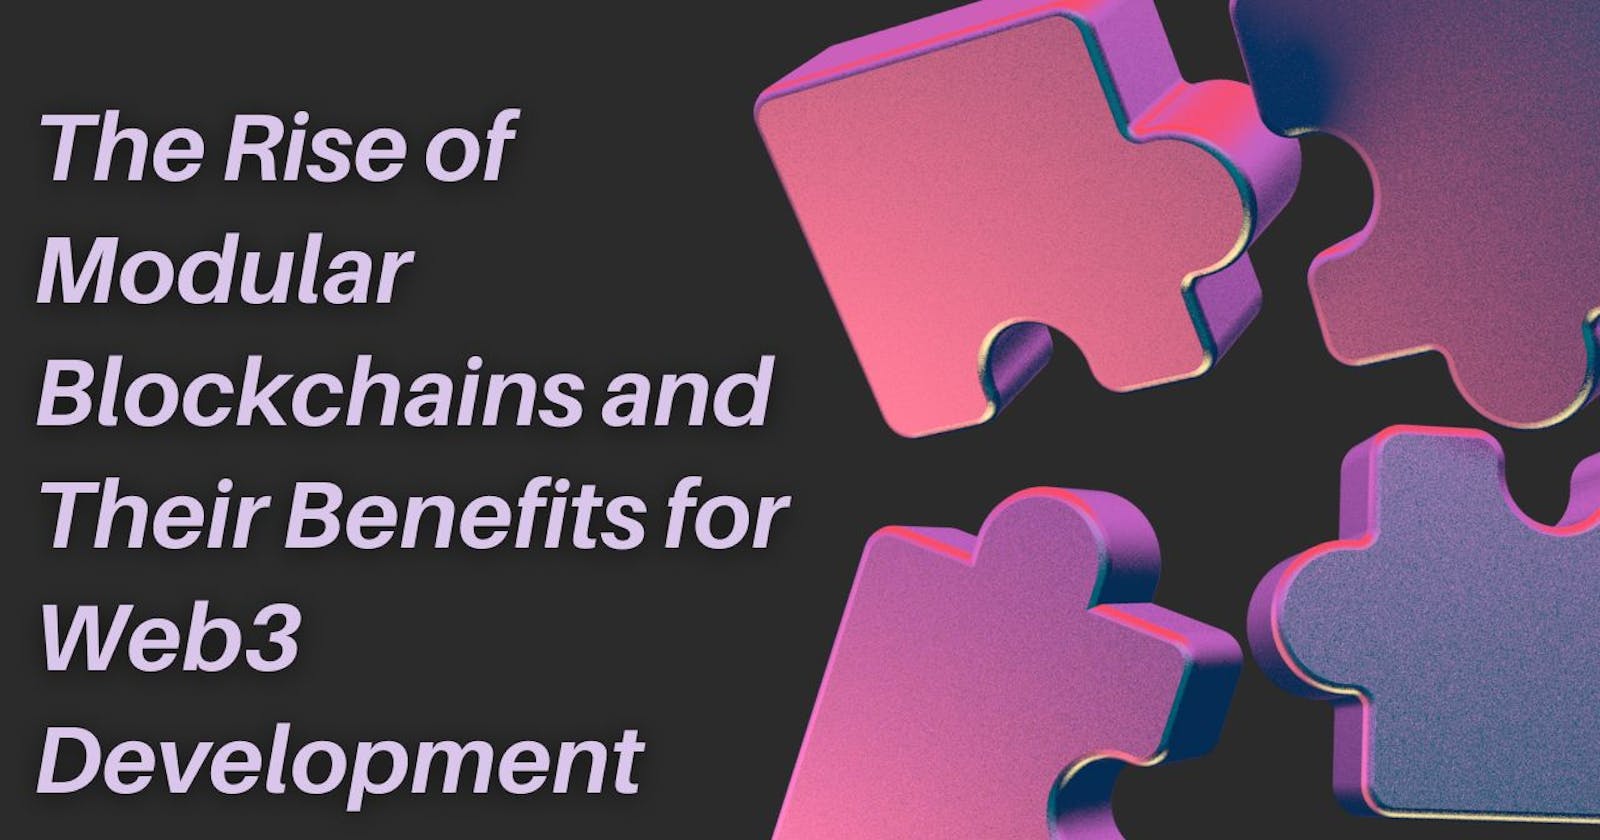 The Rise of Modular Blockchains and Their Benefits for Web3 Development